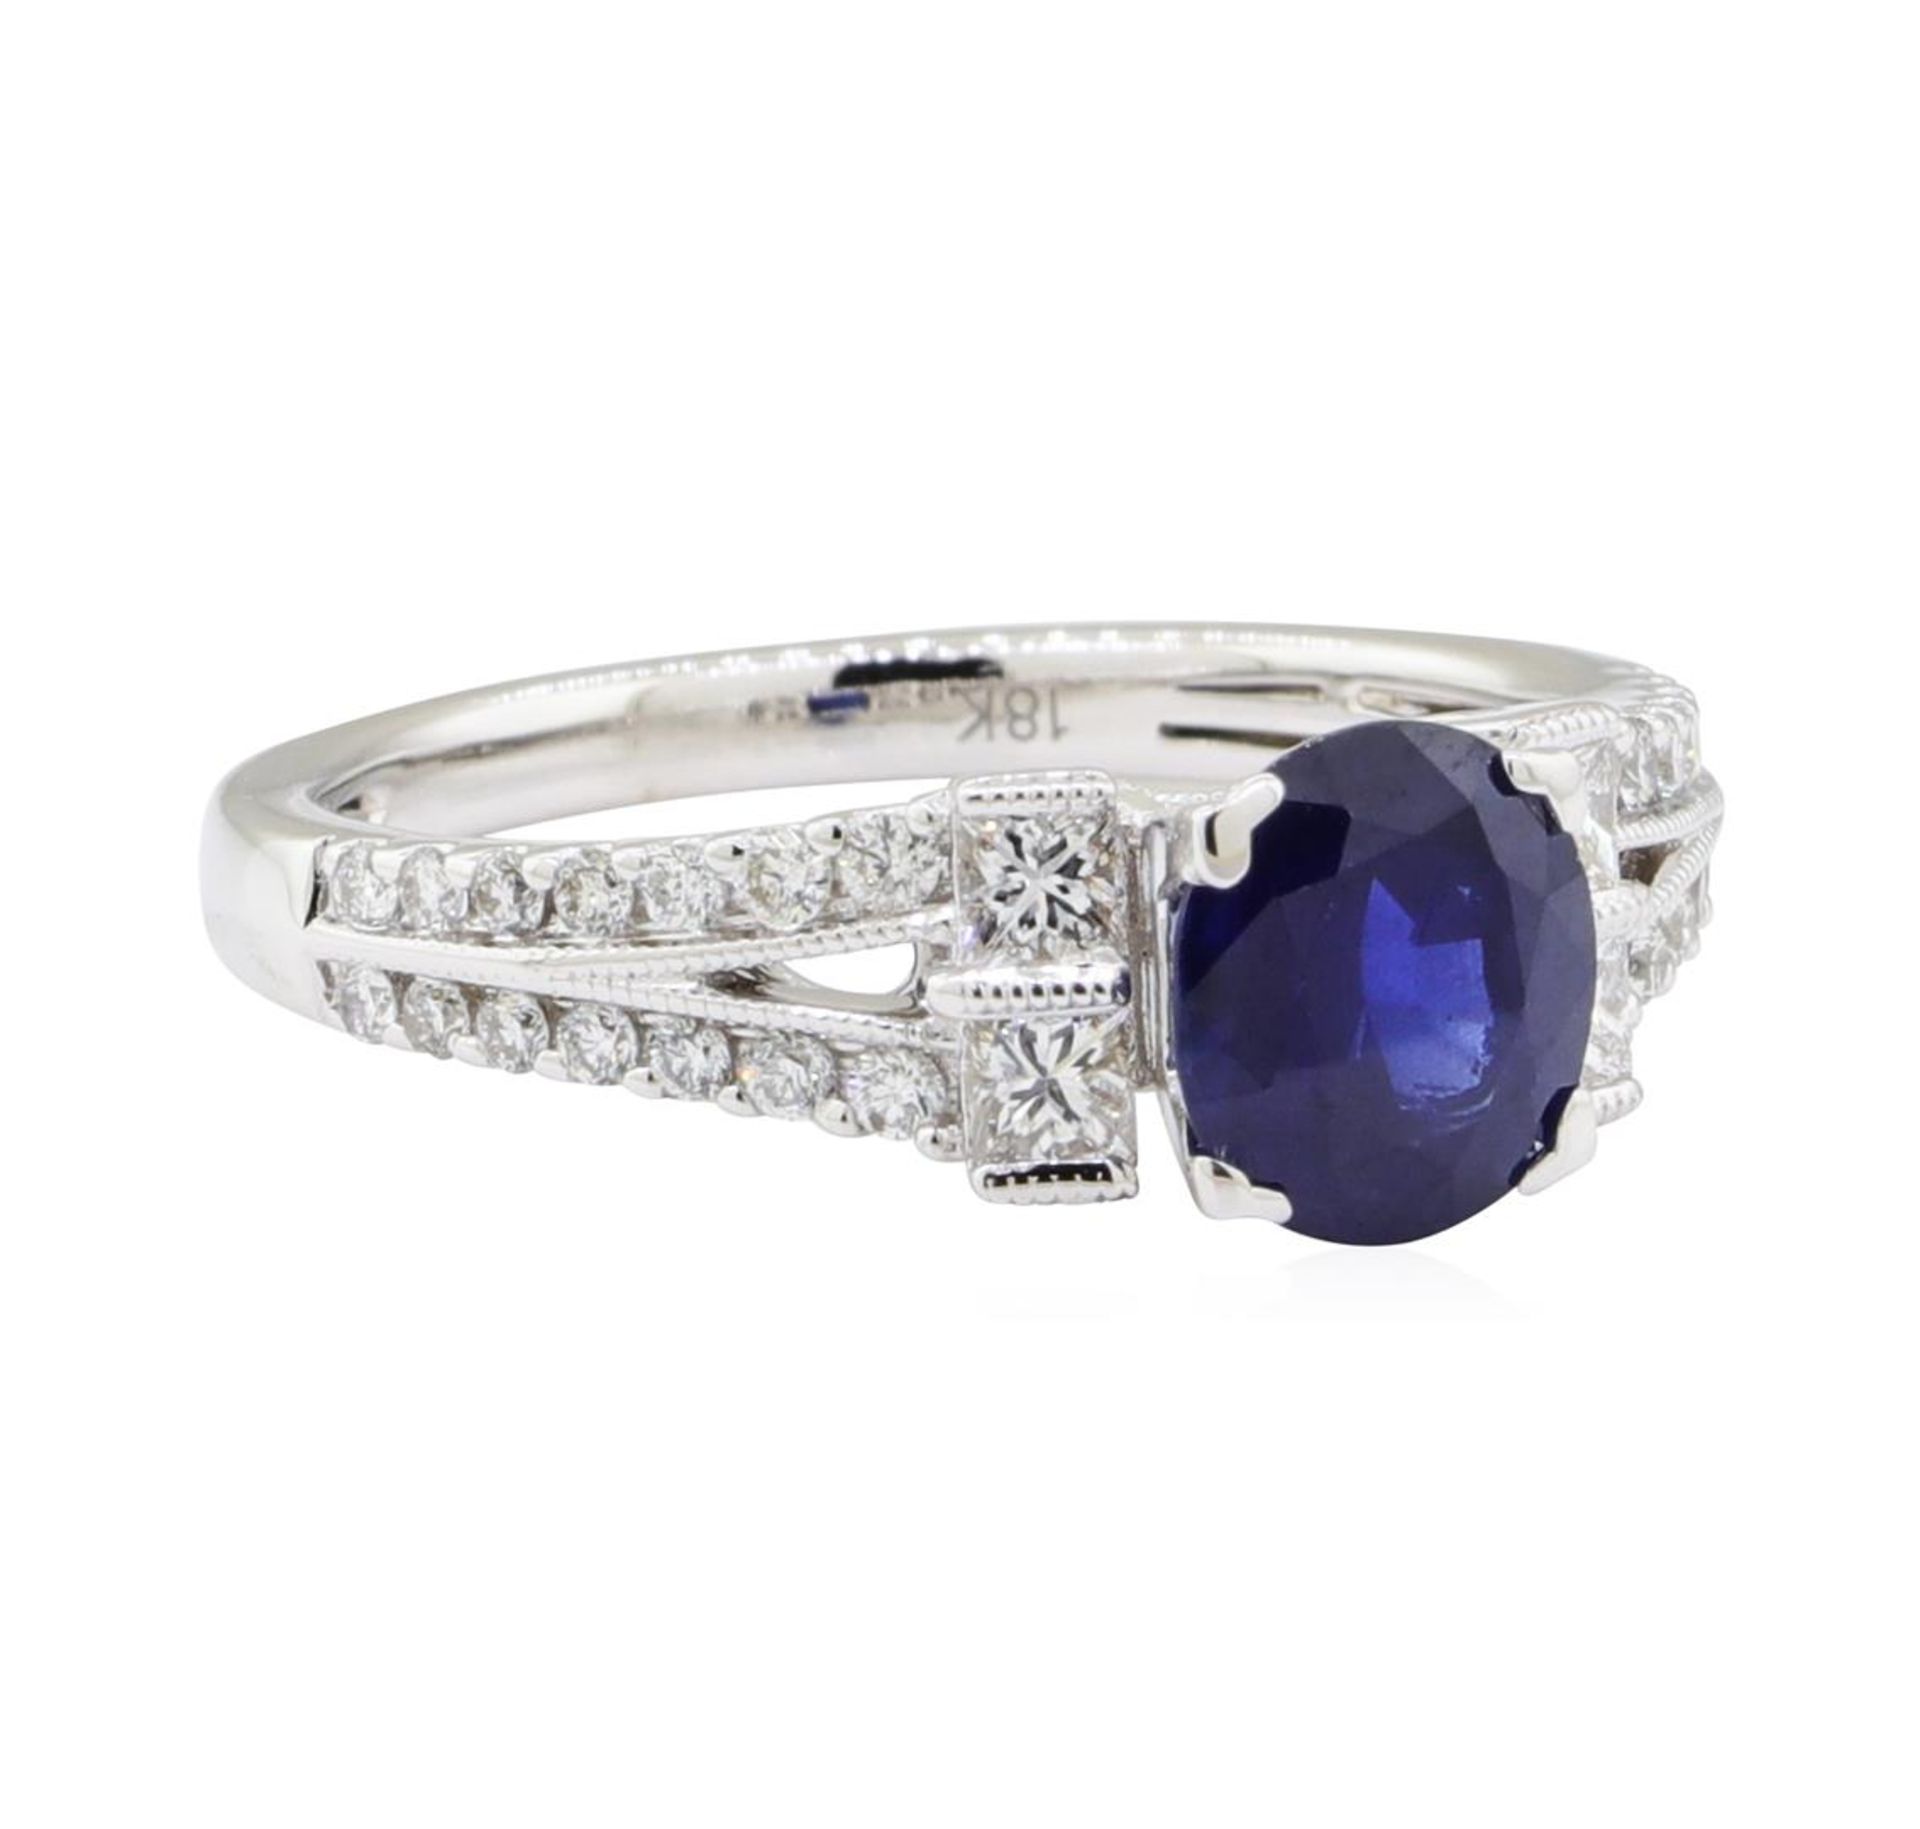 1.98 ctw Sapphire and Diamond Ring - 18KT White Gold